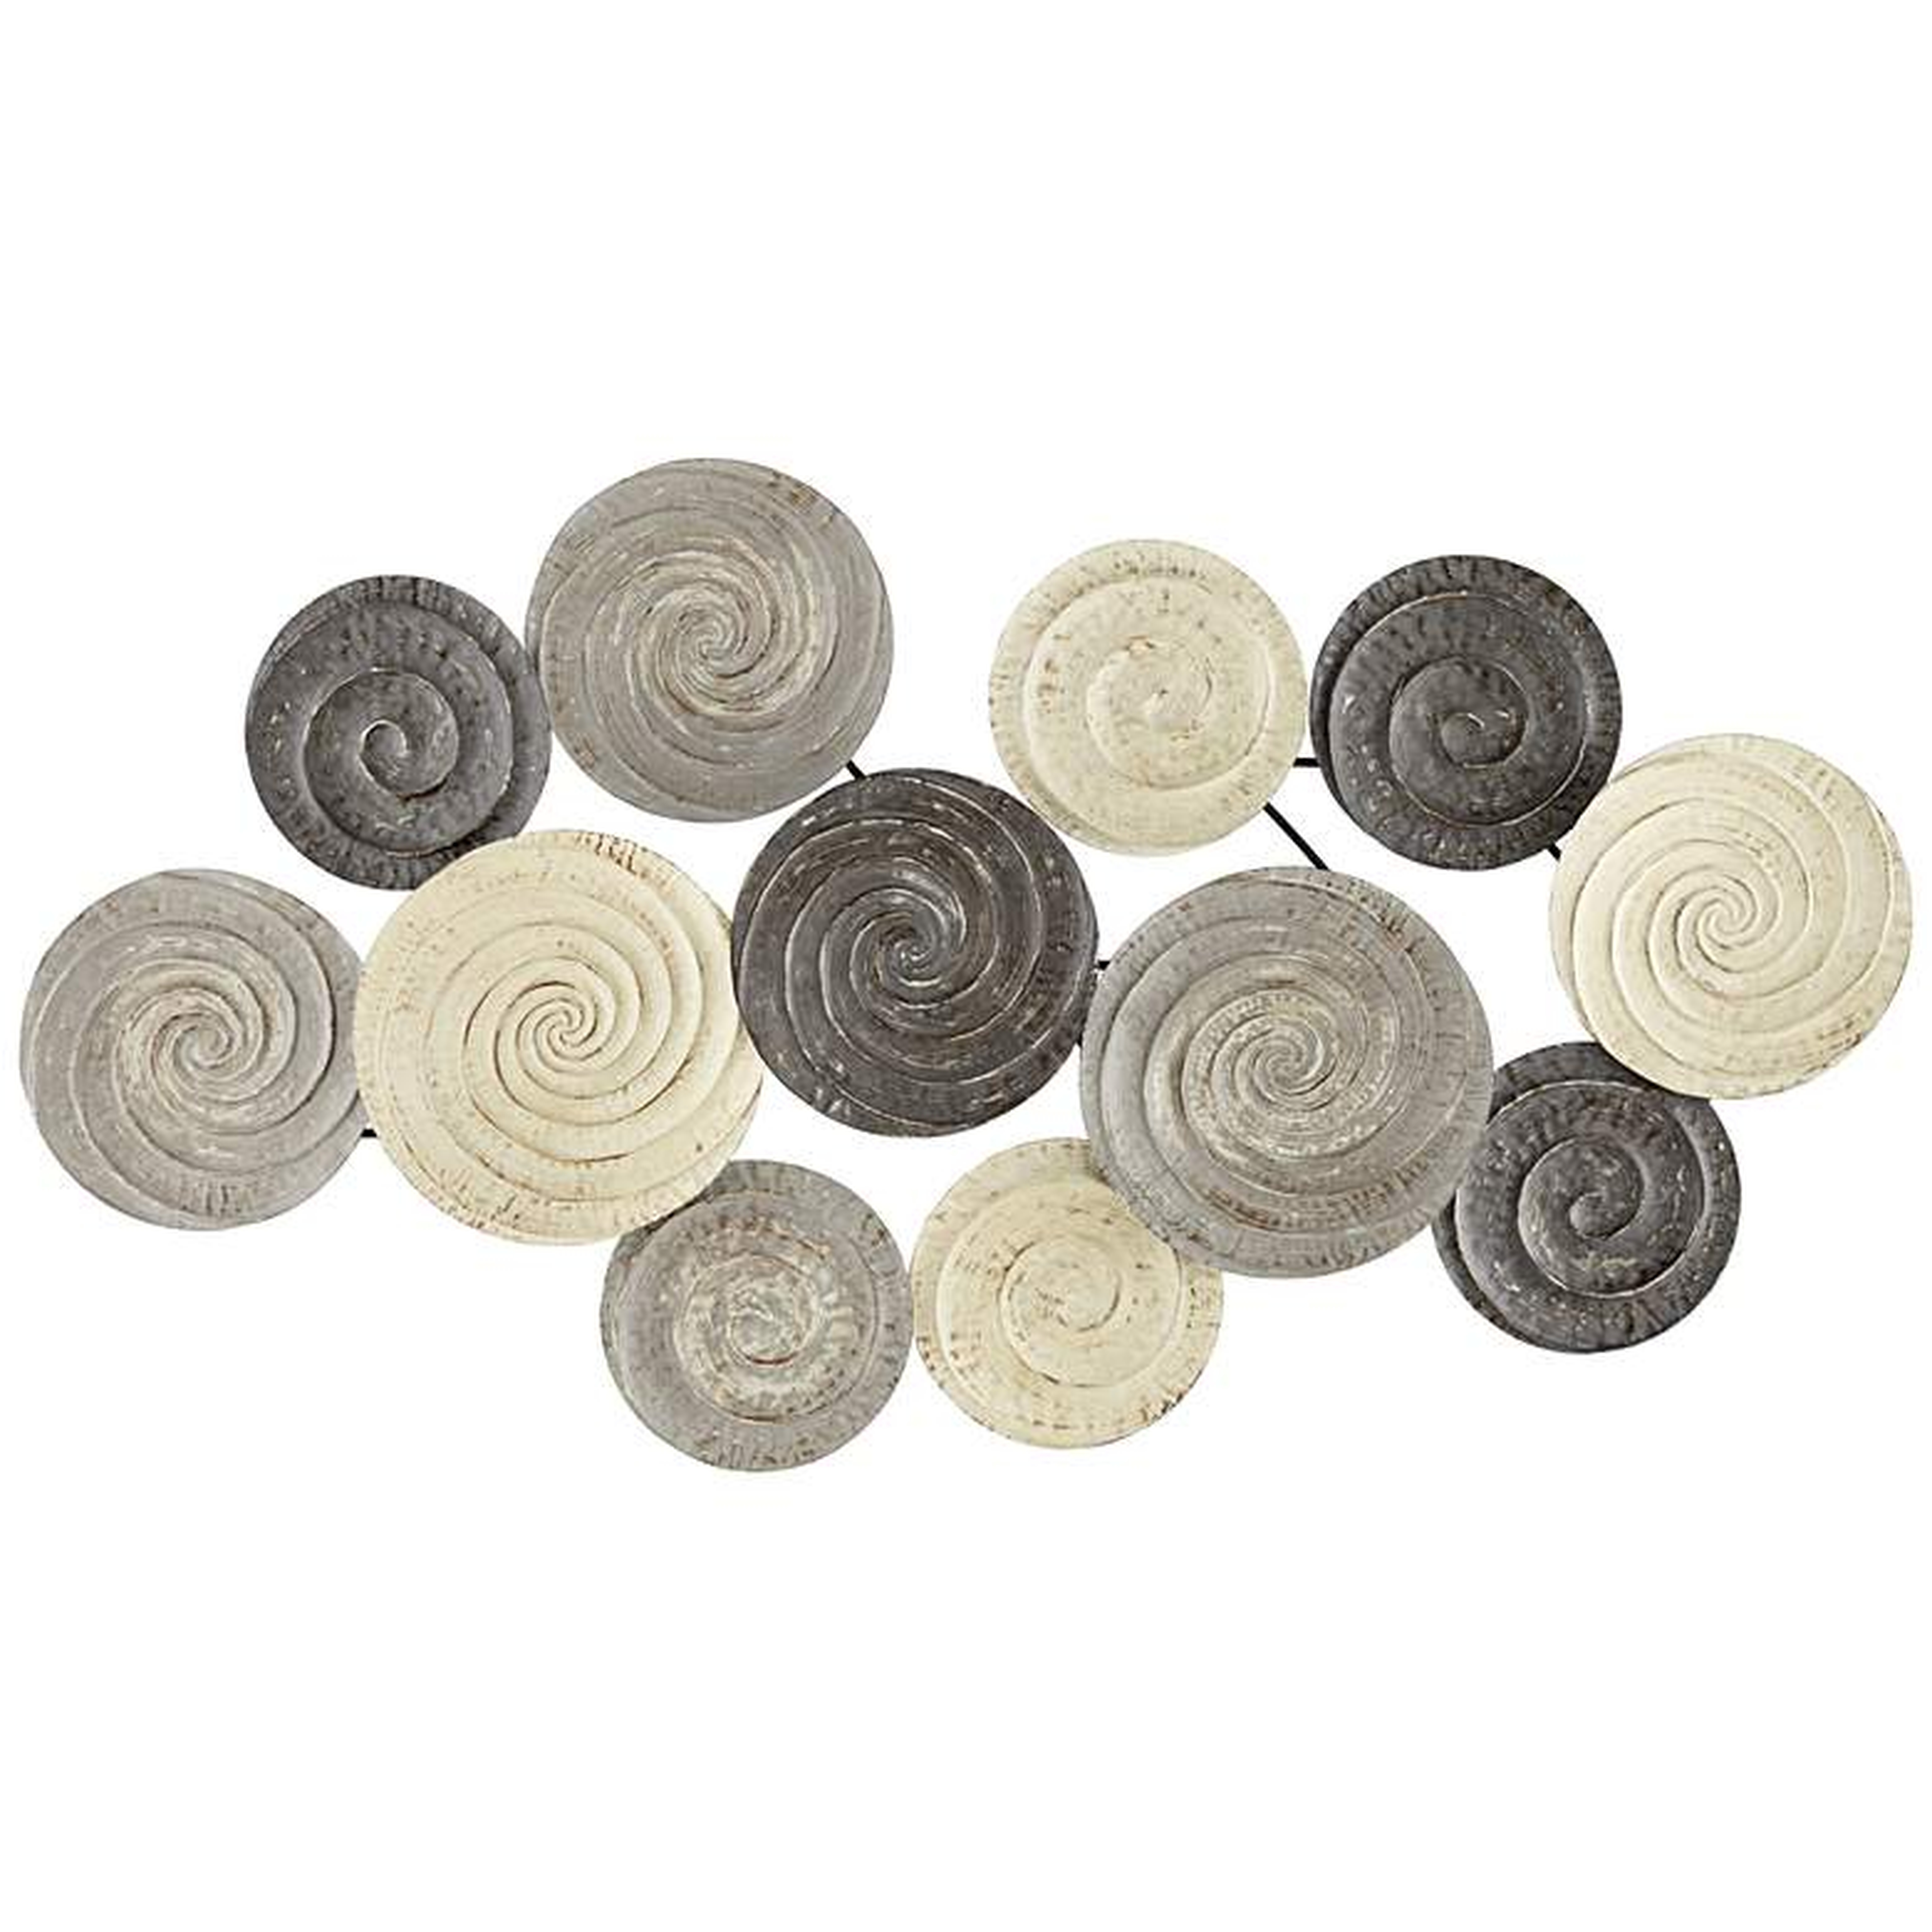 Spiral Circles 49 1/2" Wide Painted Metal Wall Art - Lamps Plus